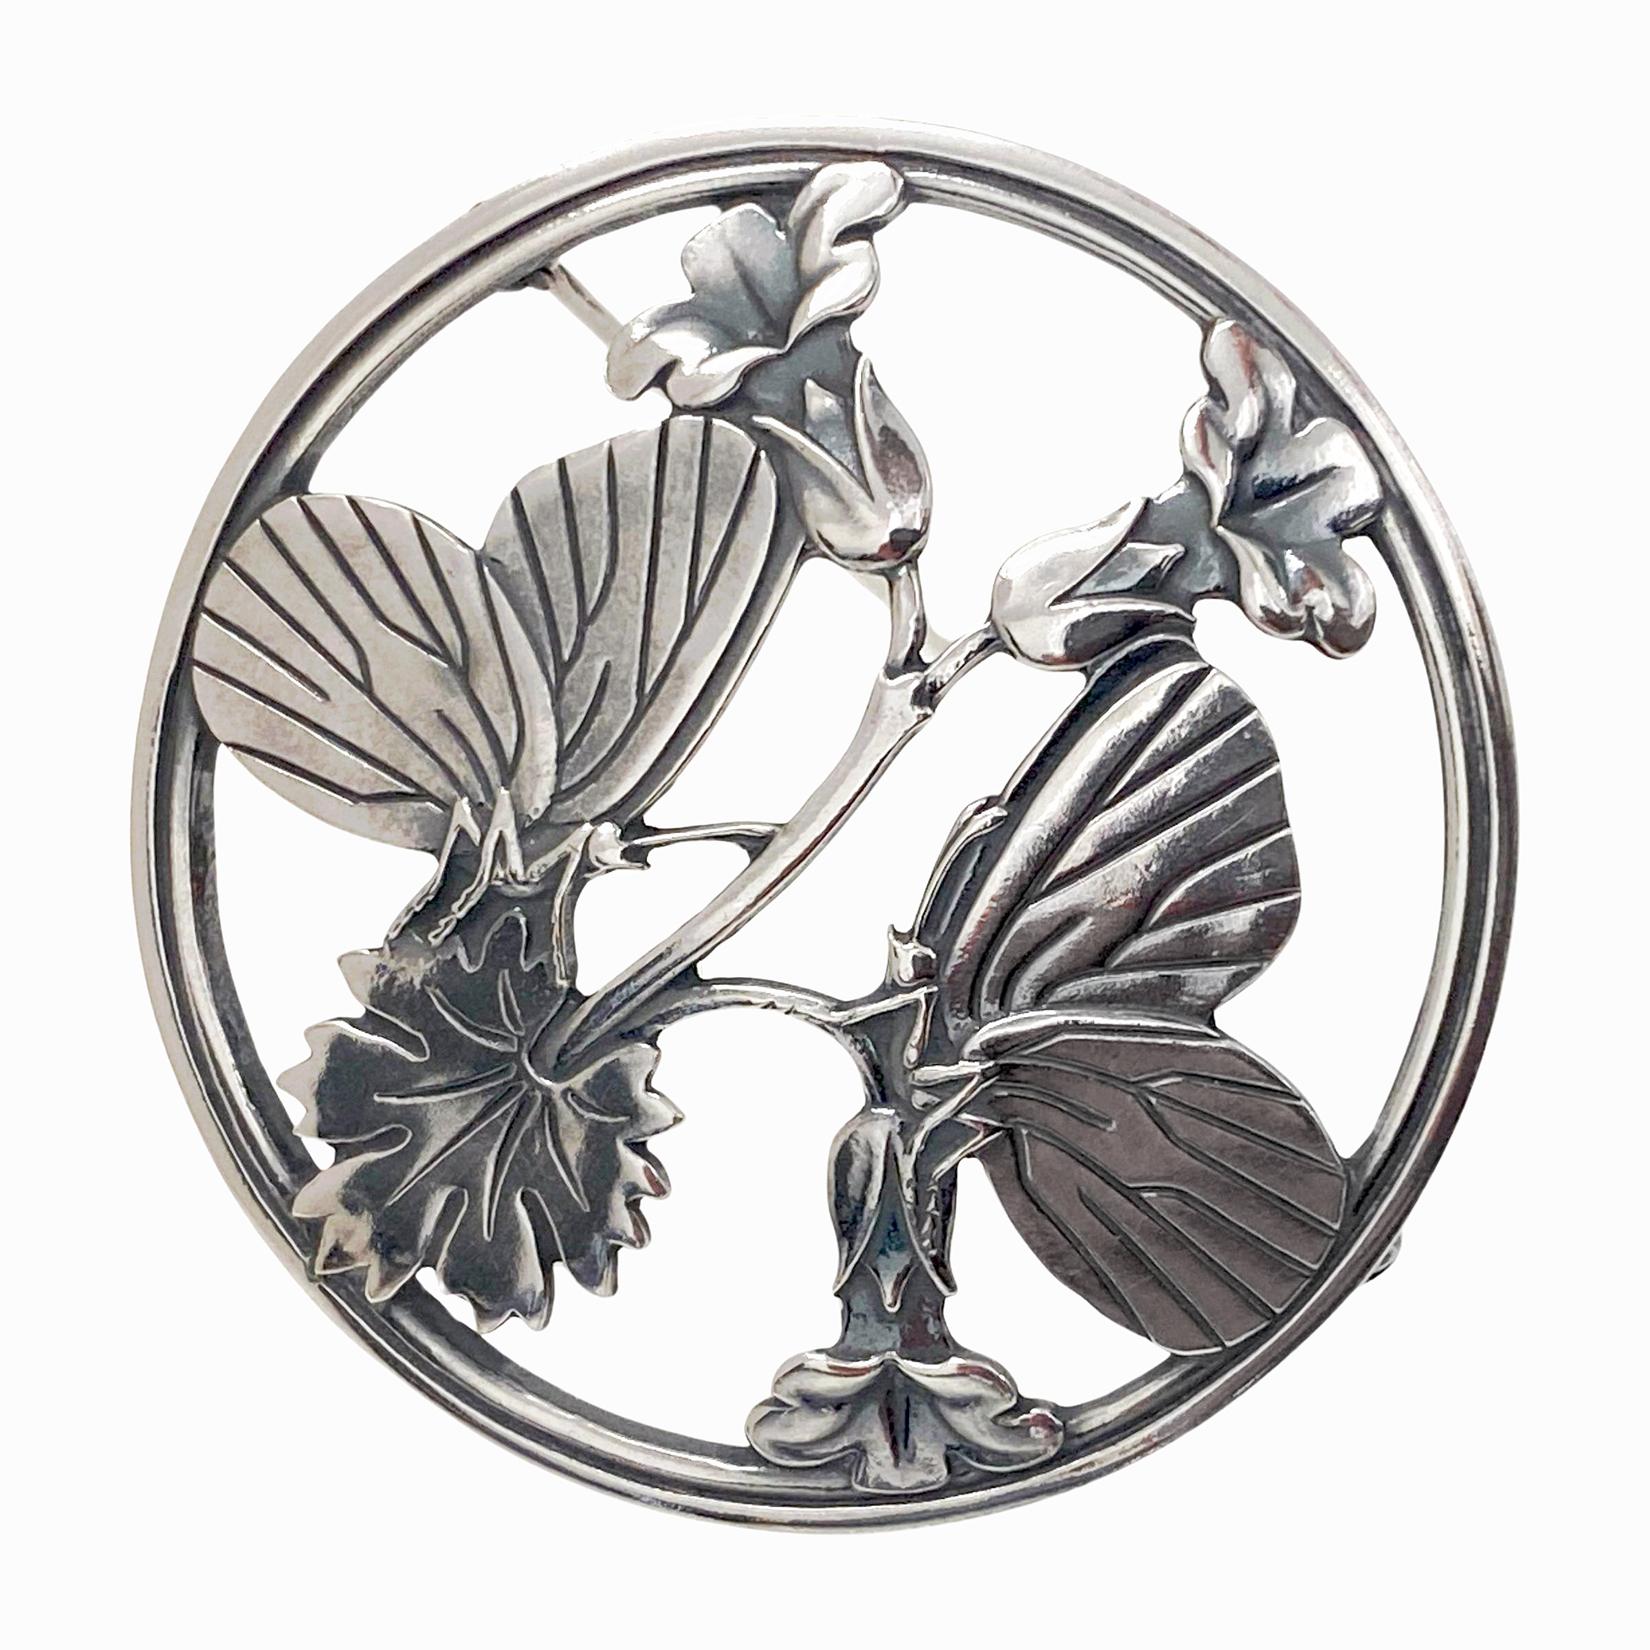 Georg Jensen Sterling Silver Butterfly and stylized Flowers Brooch C.1940. Large Brooch fully hallmarked GJ in box, Sterling Denmark and design number 283, C.1940’s. Designed by Arno Malinowski for Georg Jensen. The brooch of circular shape with